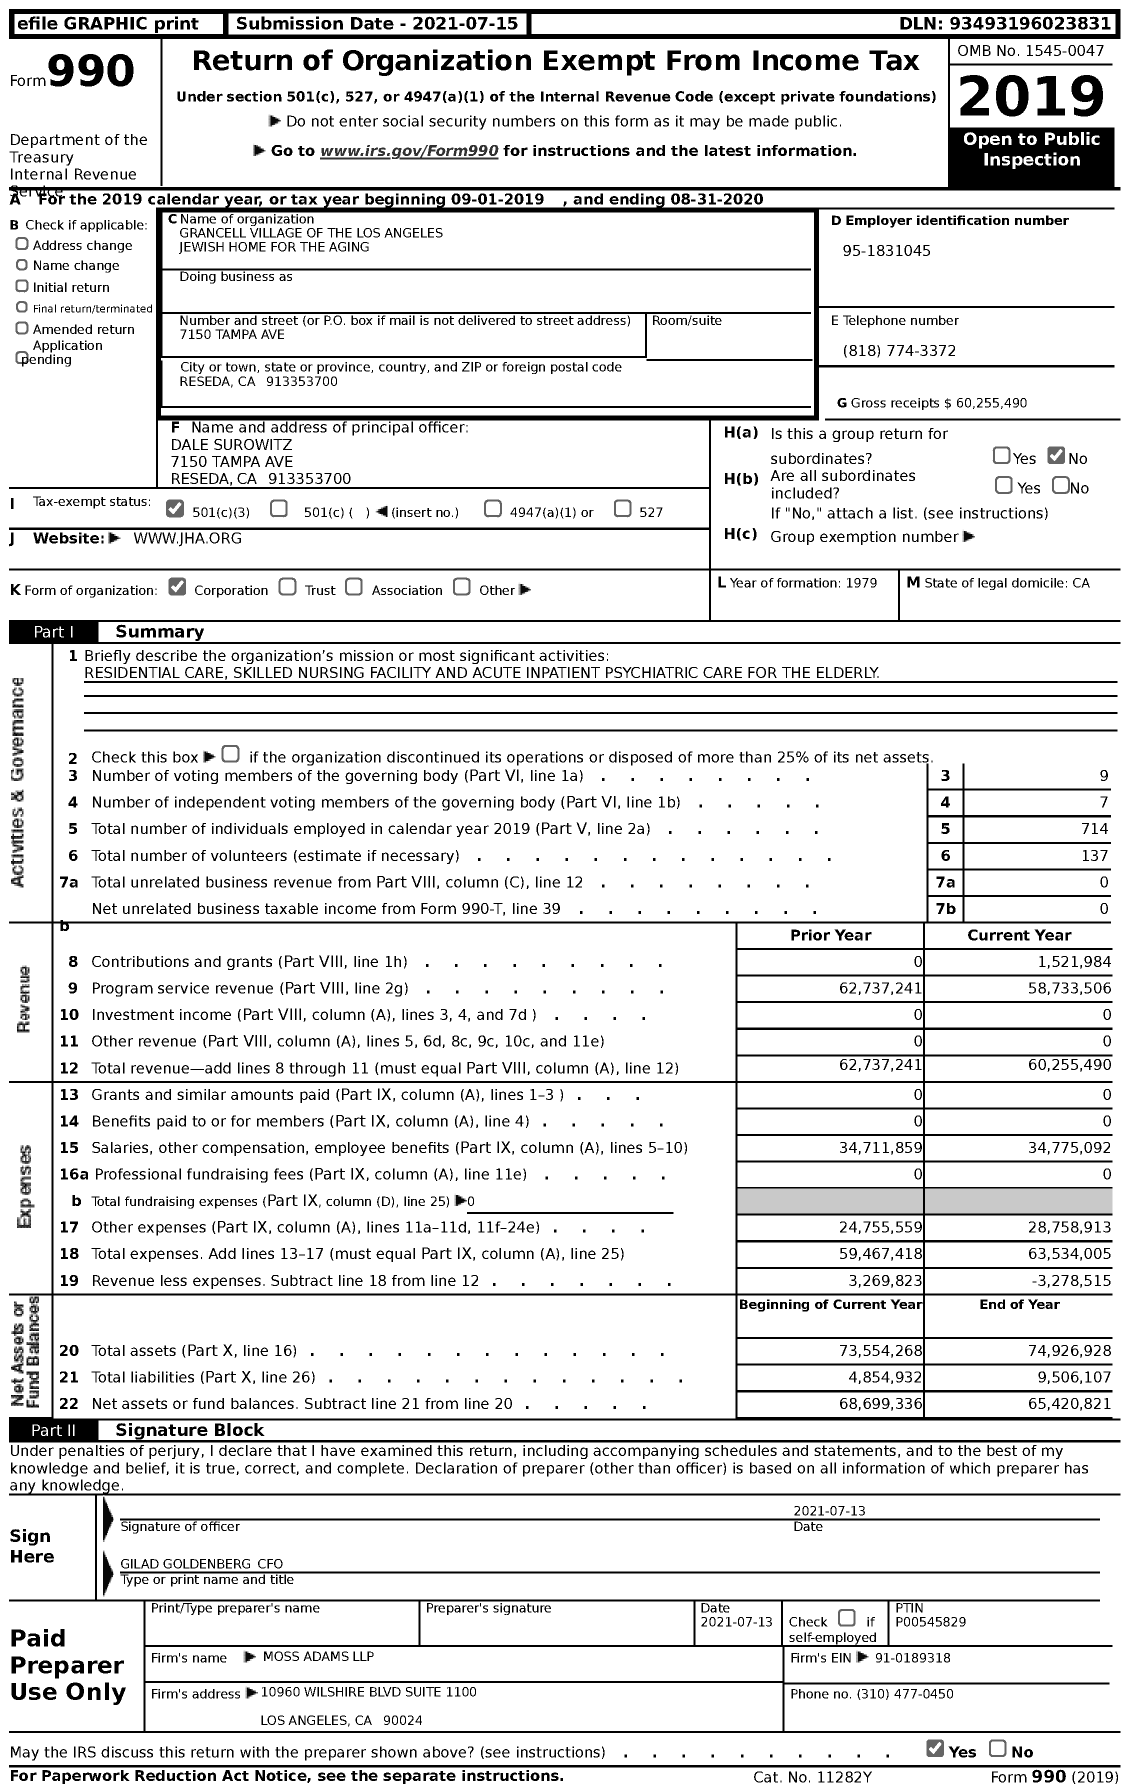 Image of first page of 2019 Form 990 for Grancell Village of the Los Angeles Jewish Home for the Aging